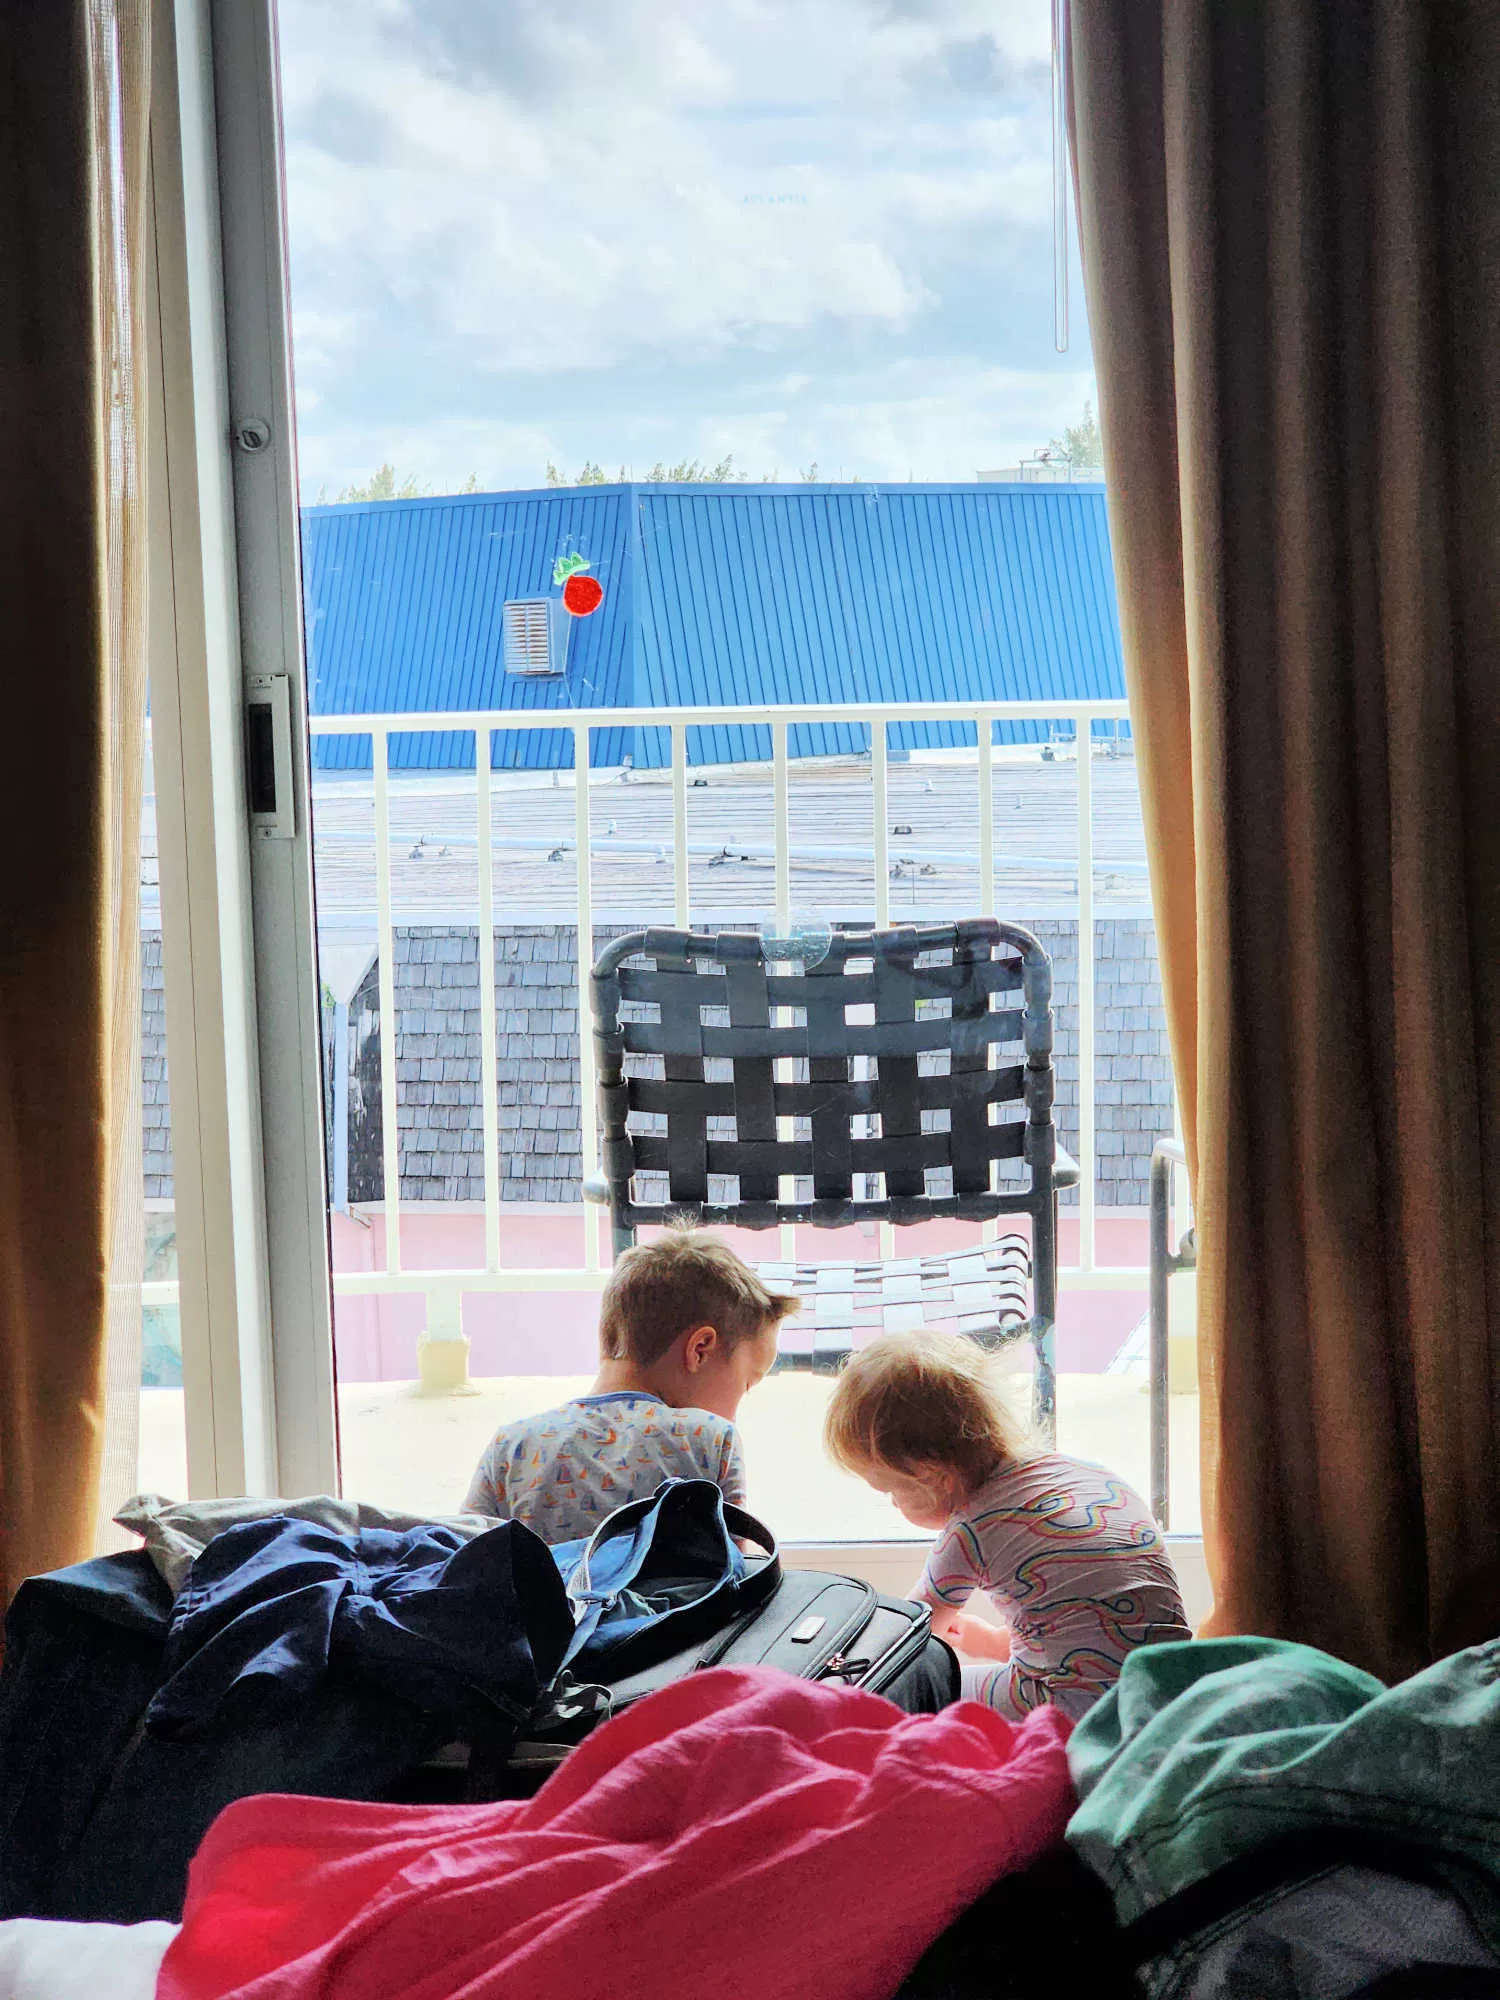 Two young kids play in a hotel room. They are sitting by the window, adding gel clings to the window.